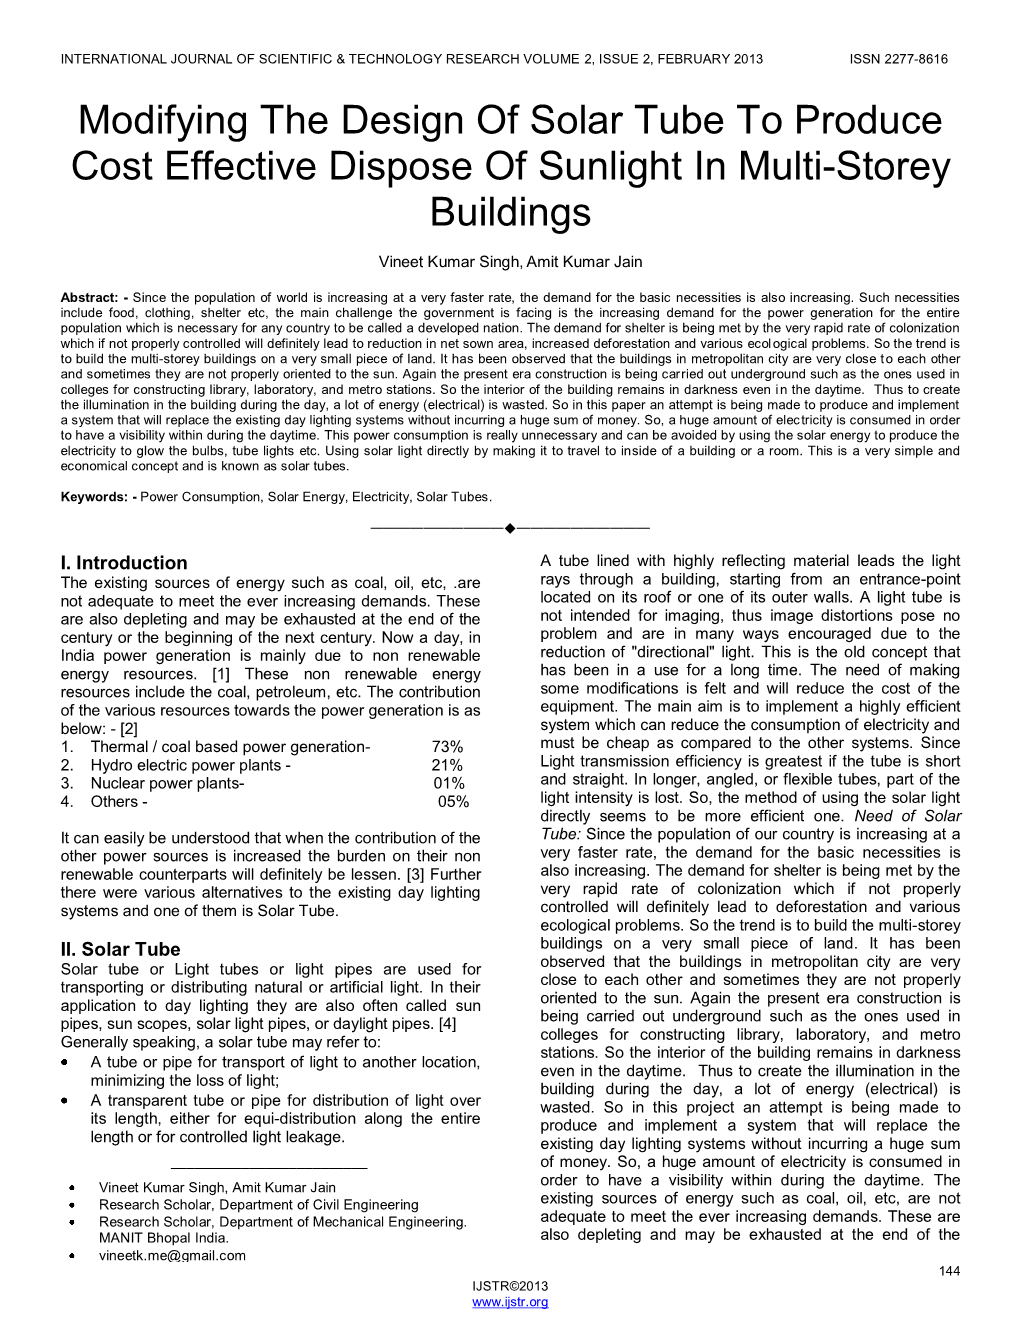 Modifying the Design of Solar Tube to Produce Cost Effective Dispose of Sunlight in Multi-Storey Buildings